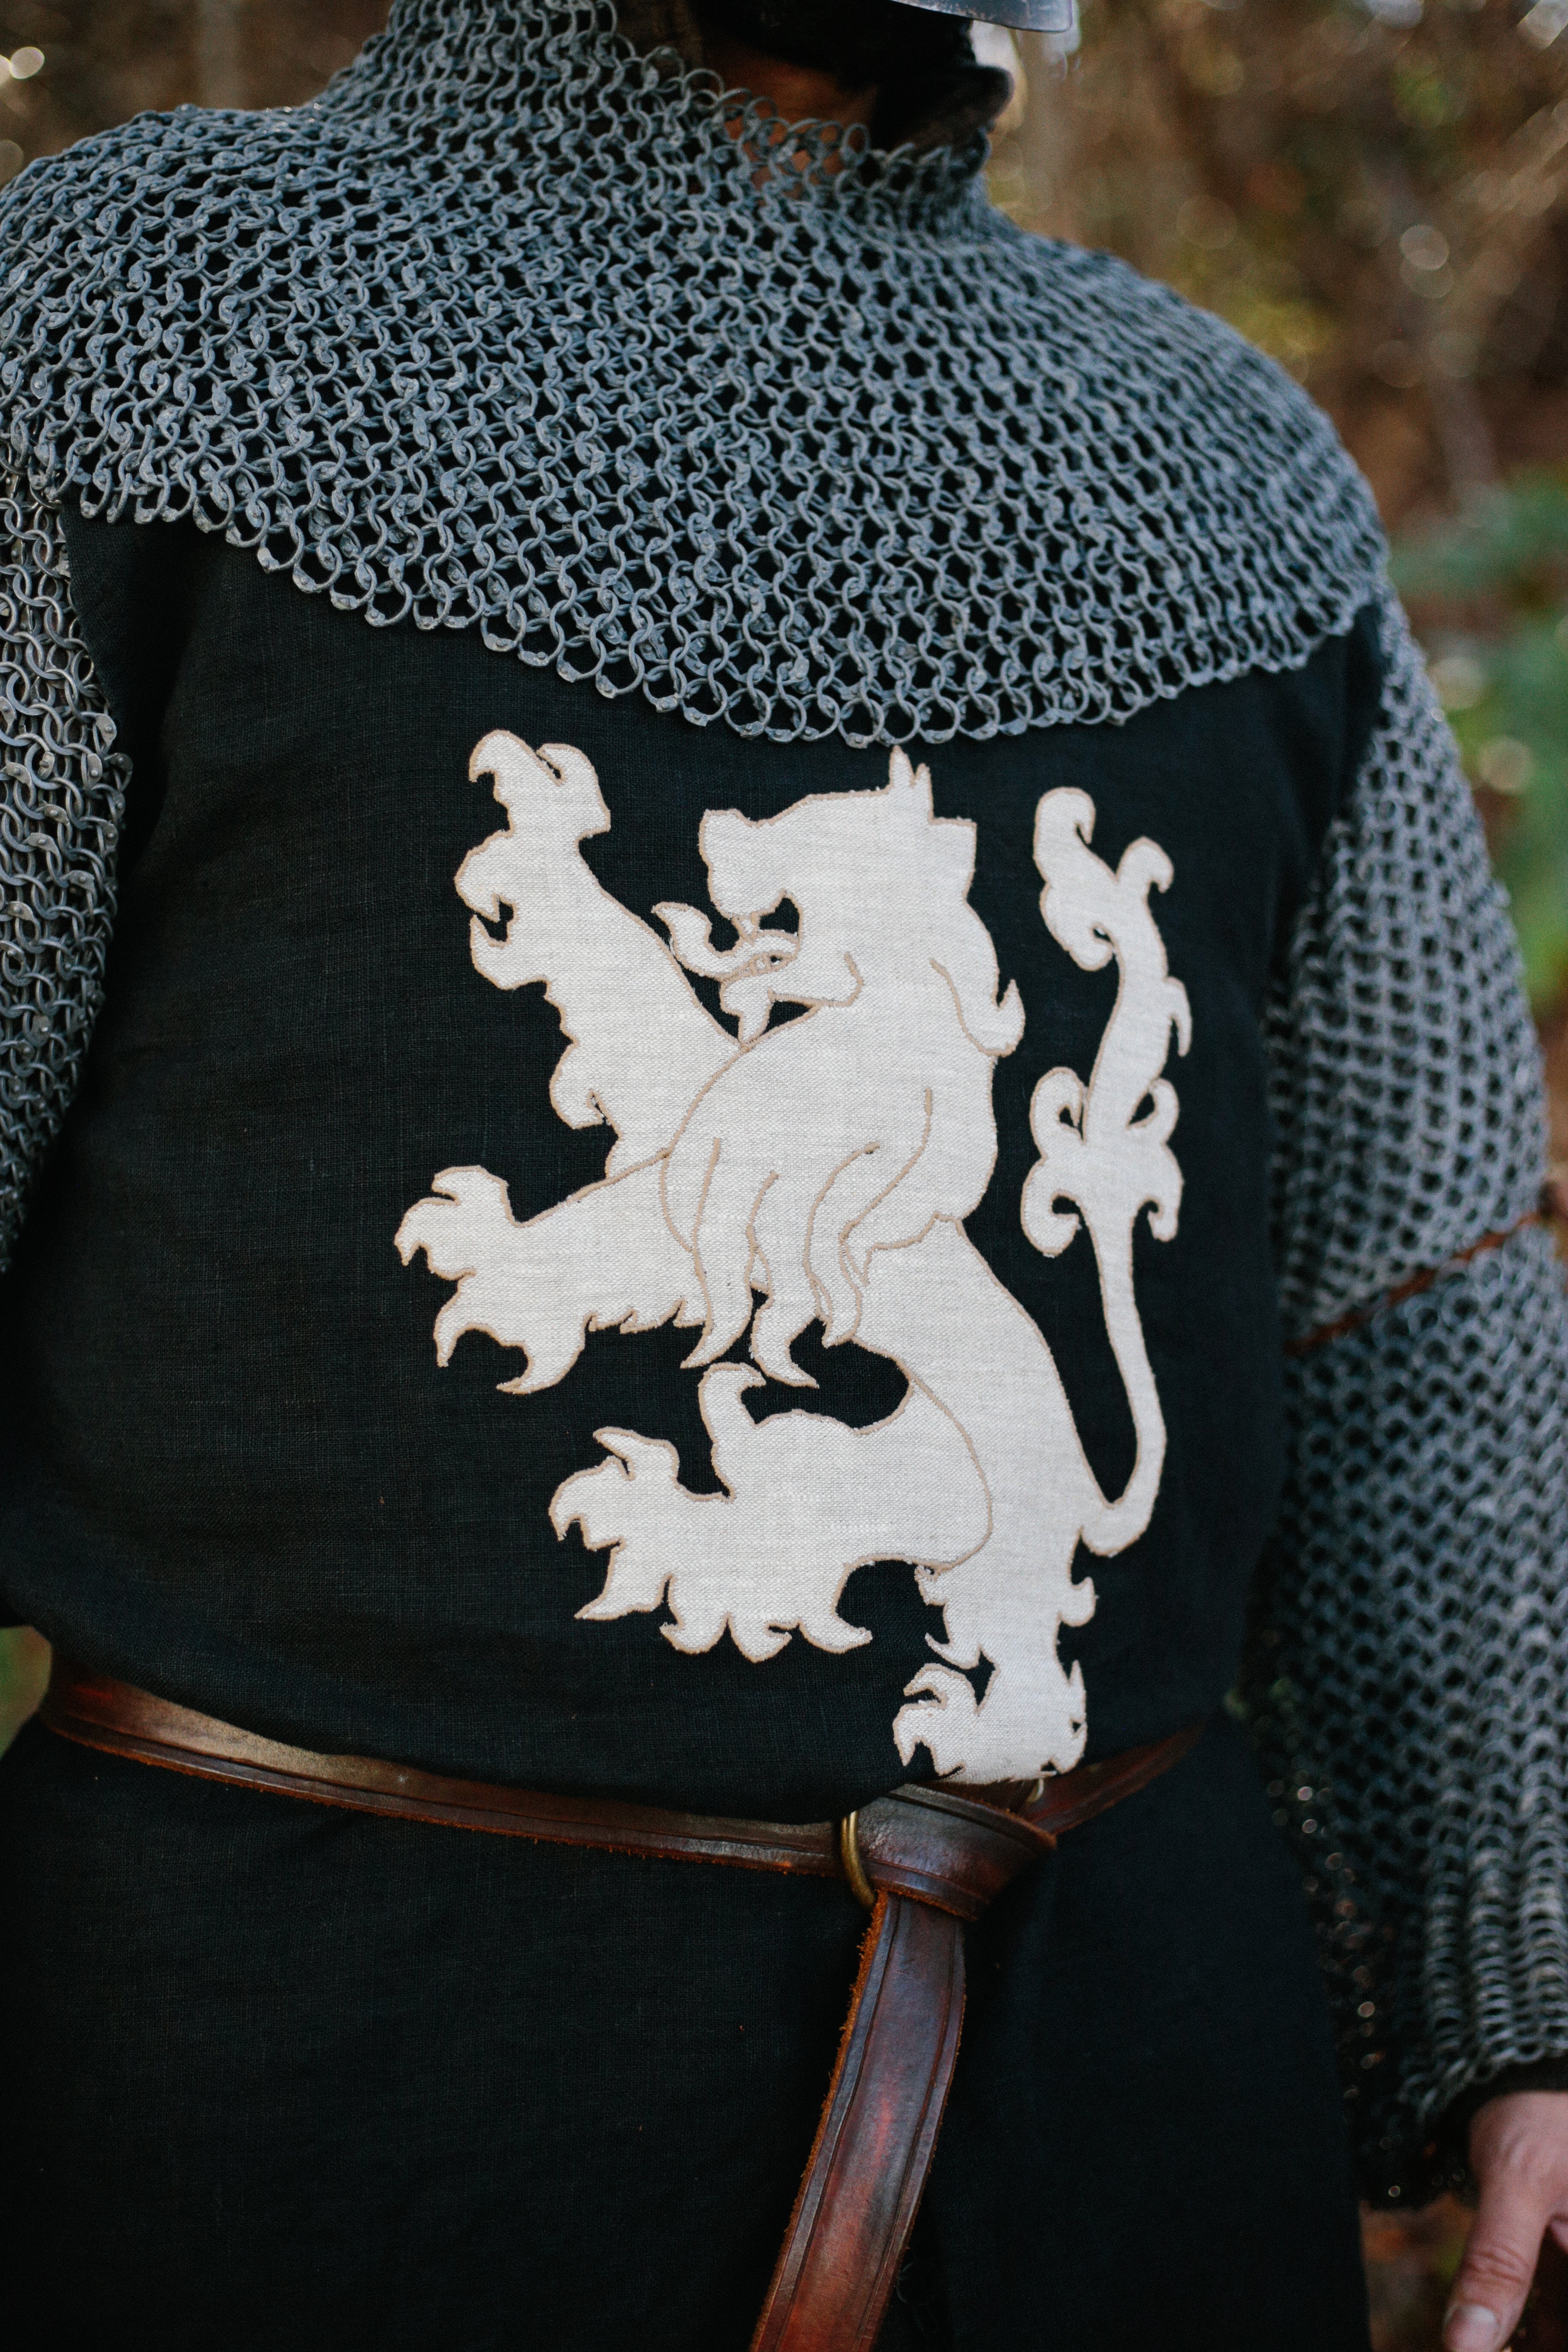 Knight's Surcoat with Heraldry